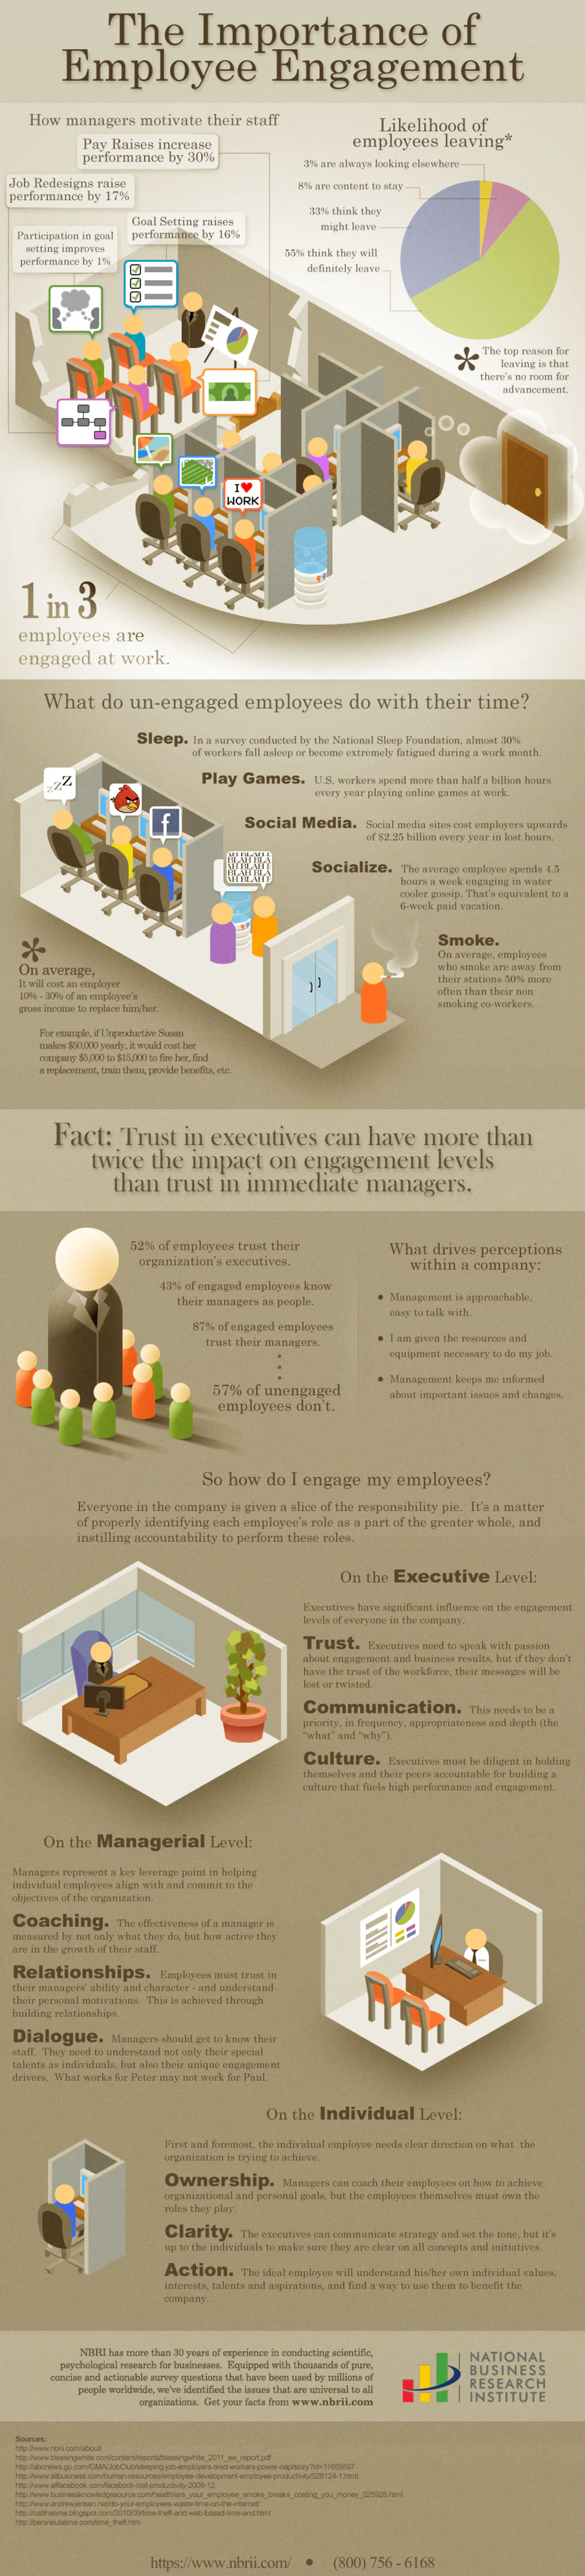 The Importance of Employee Engagement infographic